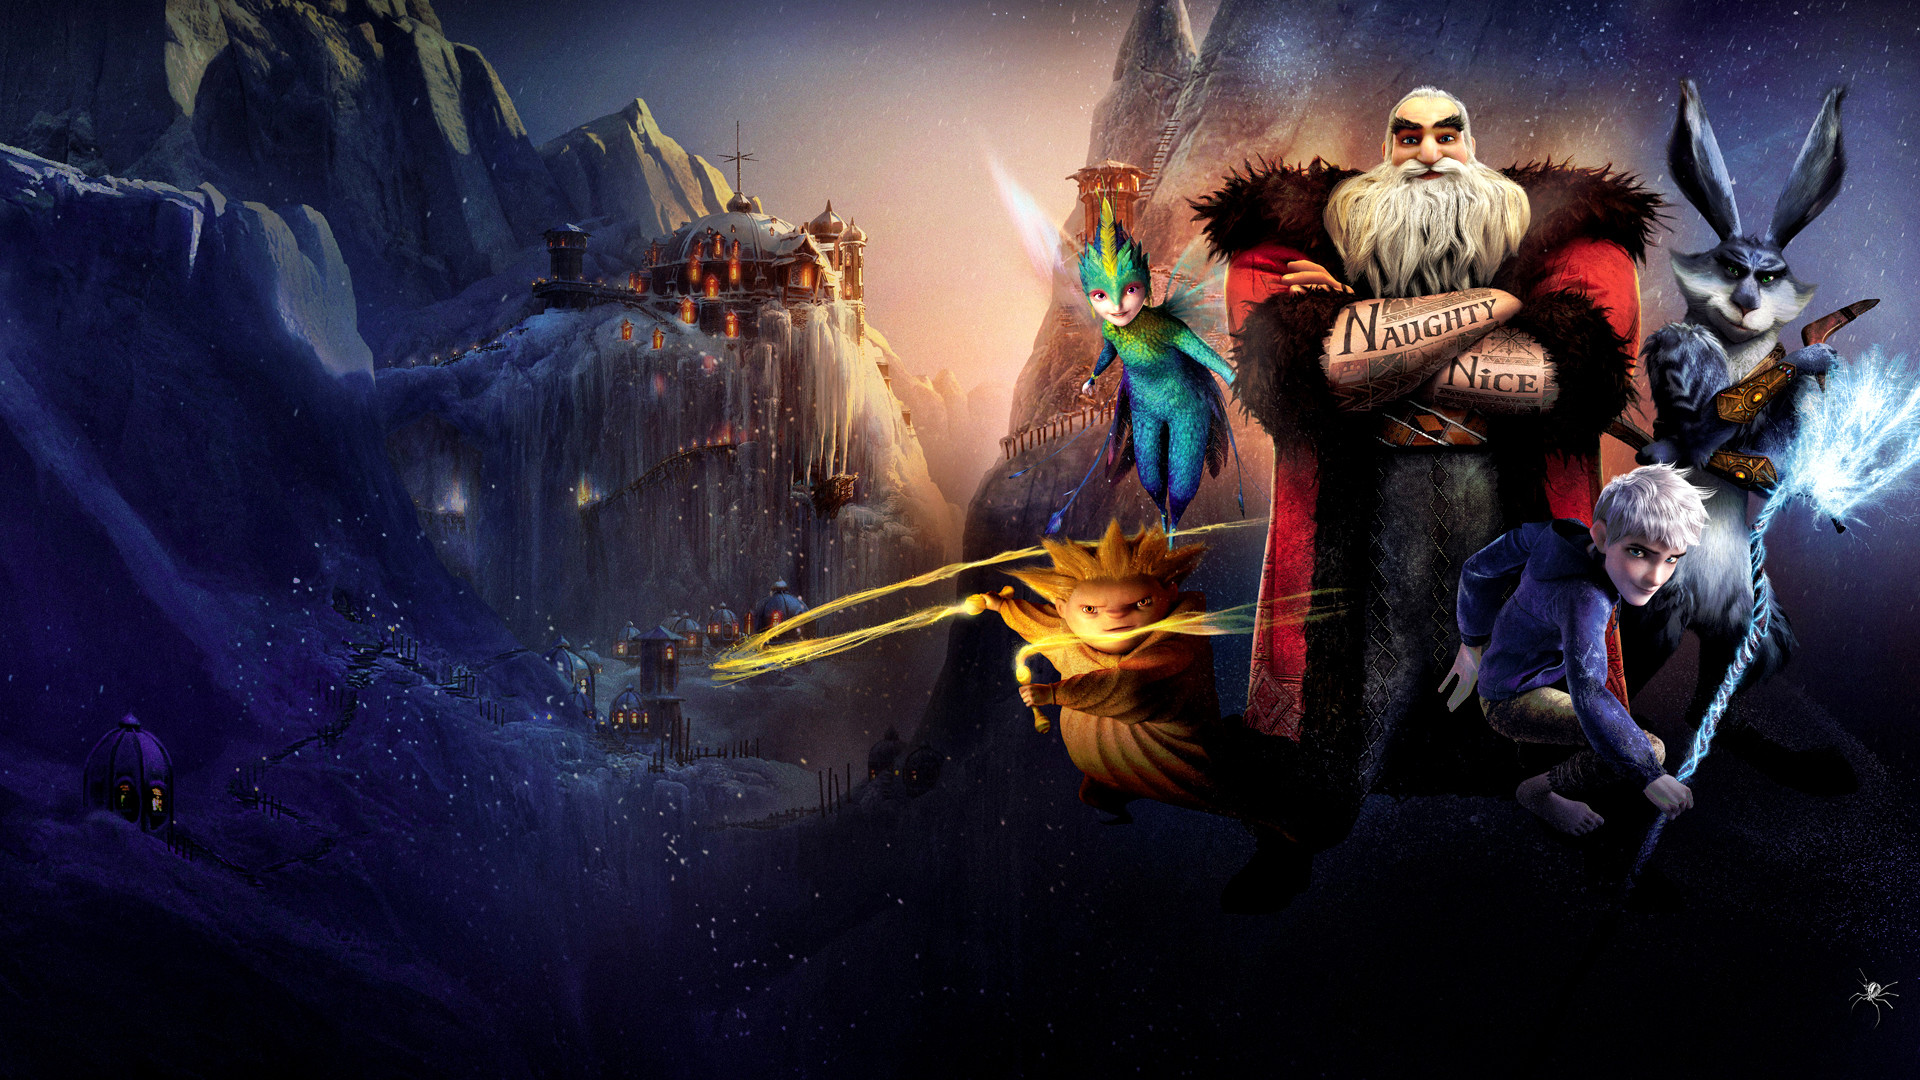 1920x1080 Rise Of The Guardians Movie Wallpapers | Sizzlingwallpapers - Part 3